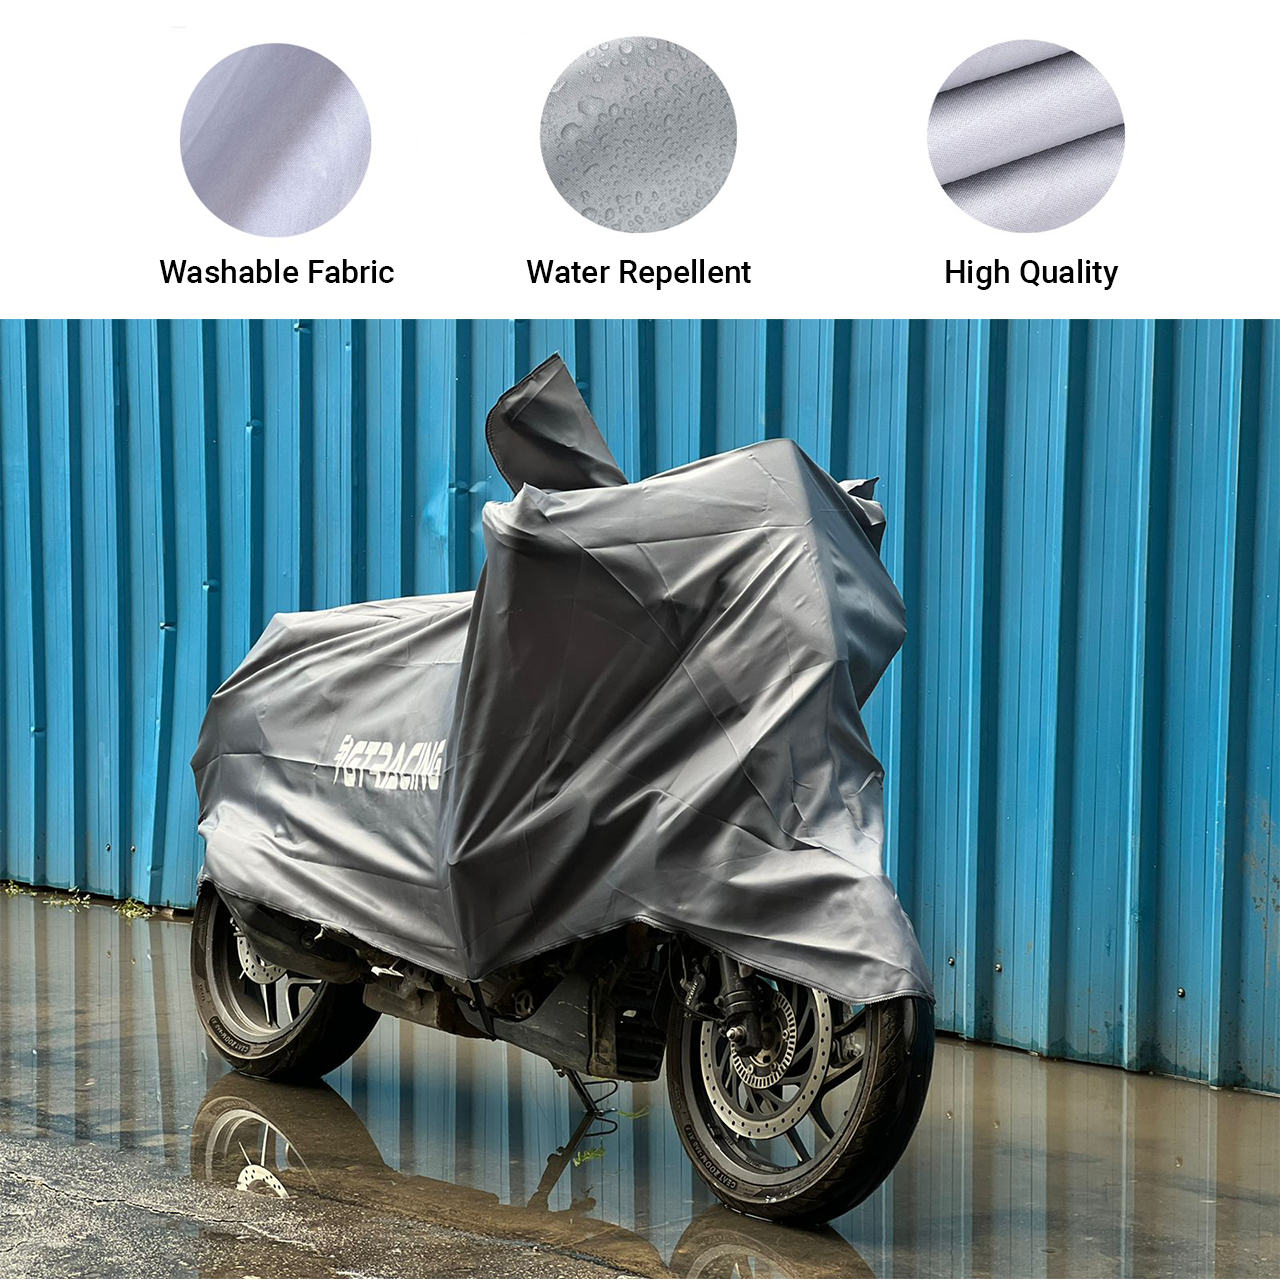 Steelbird Bike Cover GT Racing UV Protection Water-Resistant & Dustproof (Silver Matty), Bike Body Cover With Carry Bag (All Bikes Upto Cruiser Bikes)